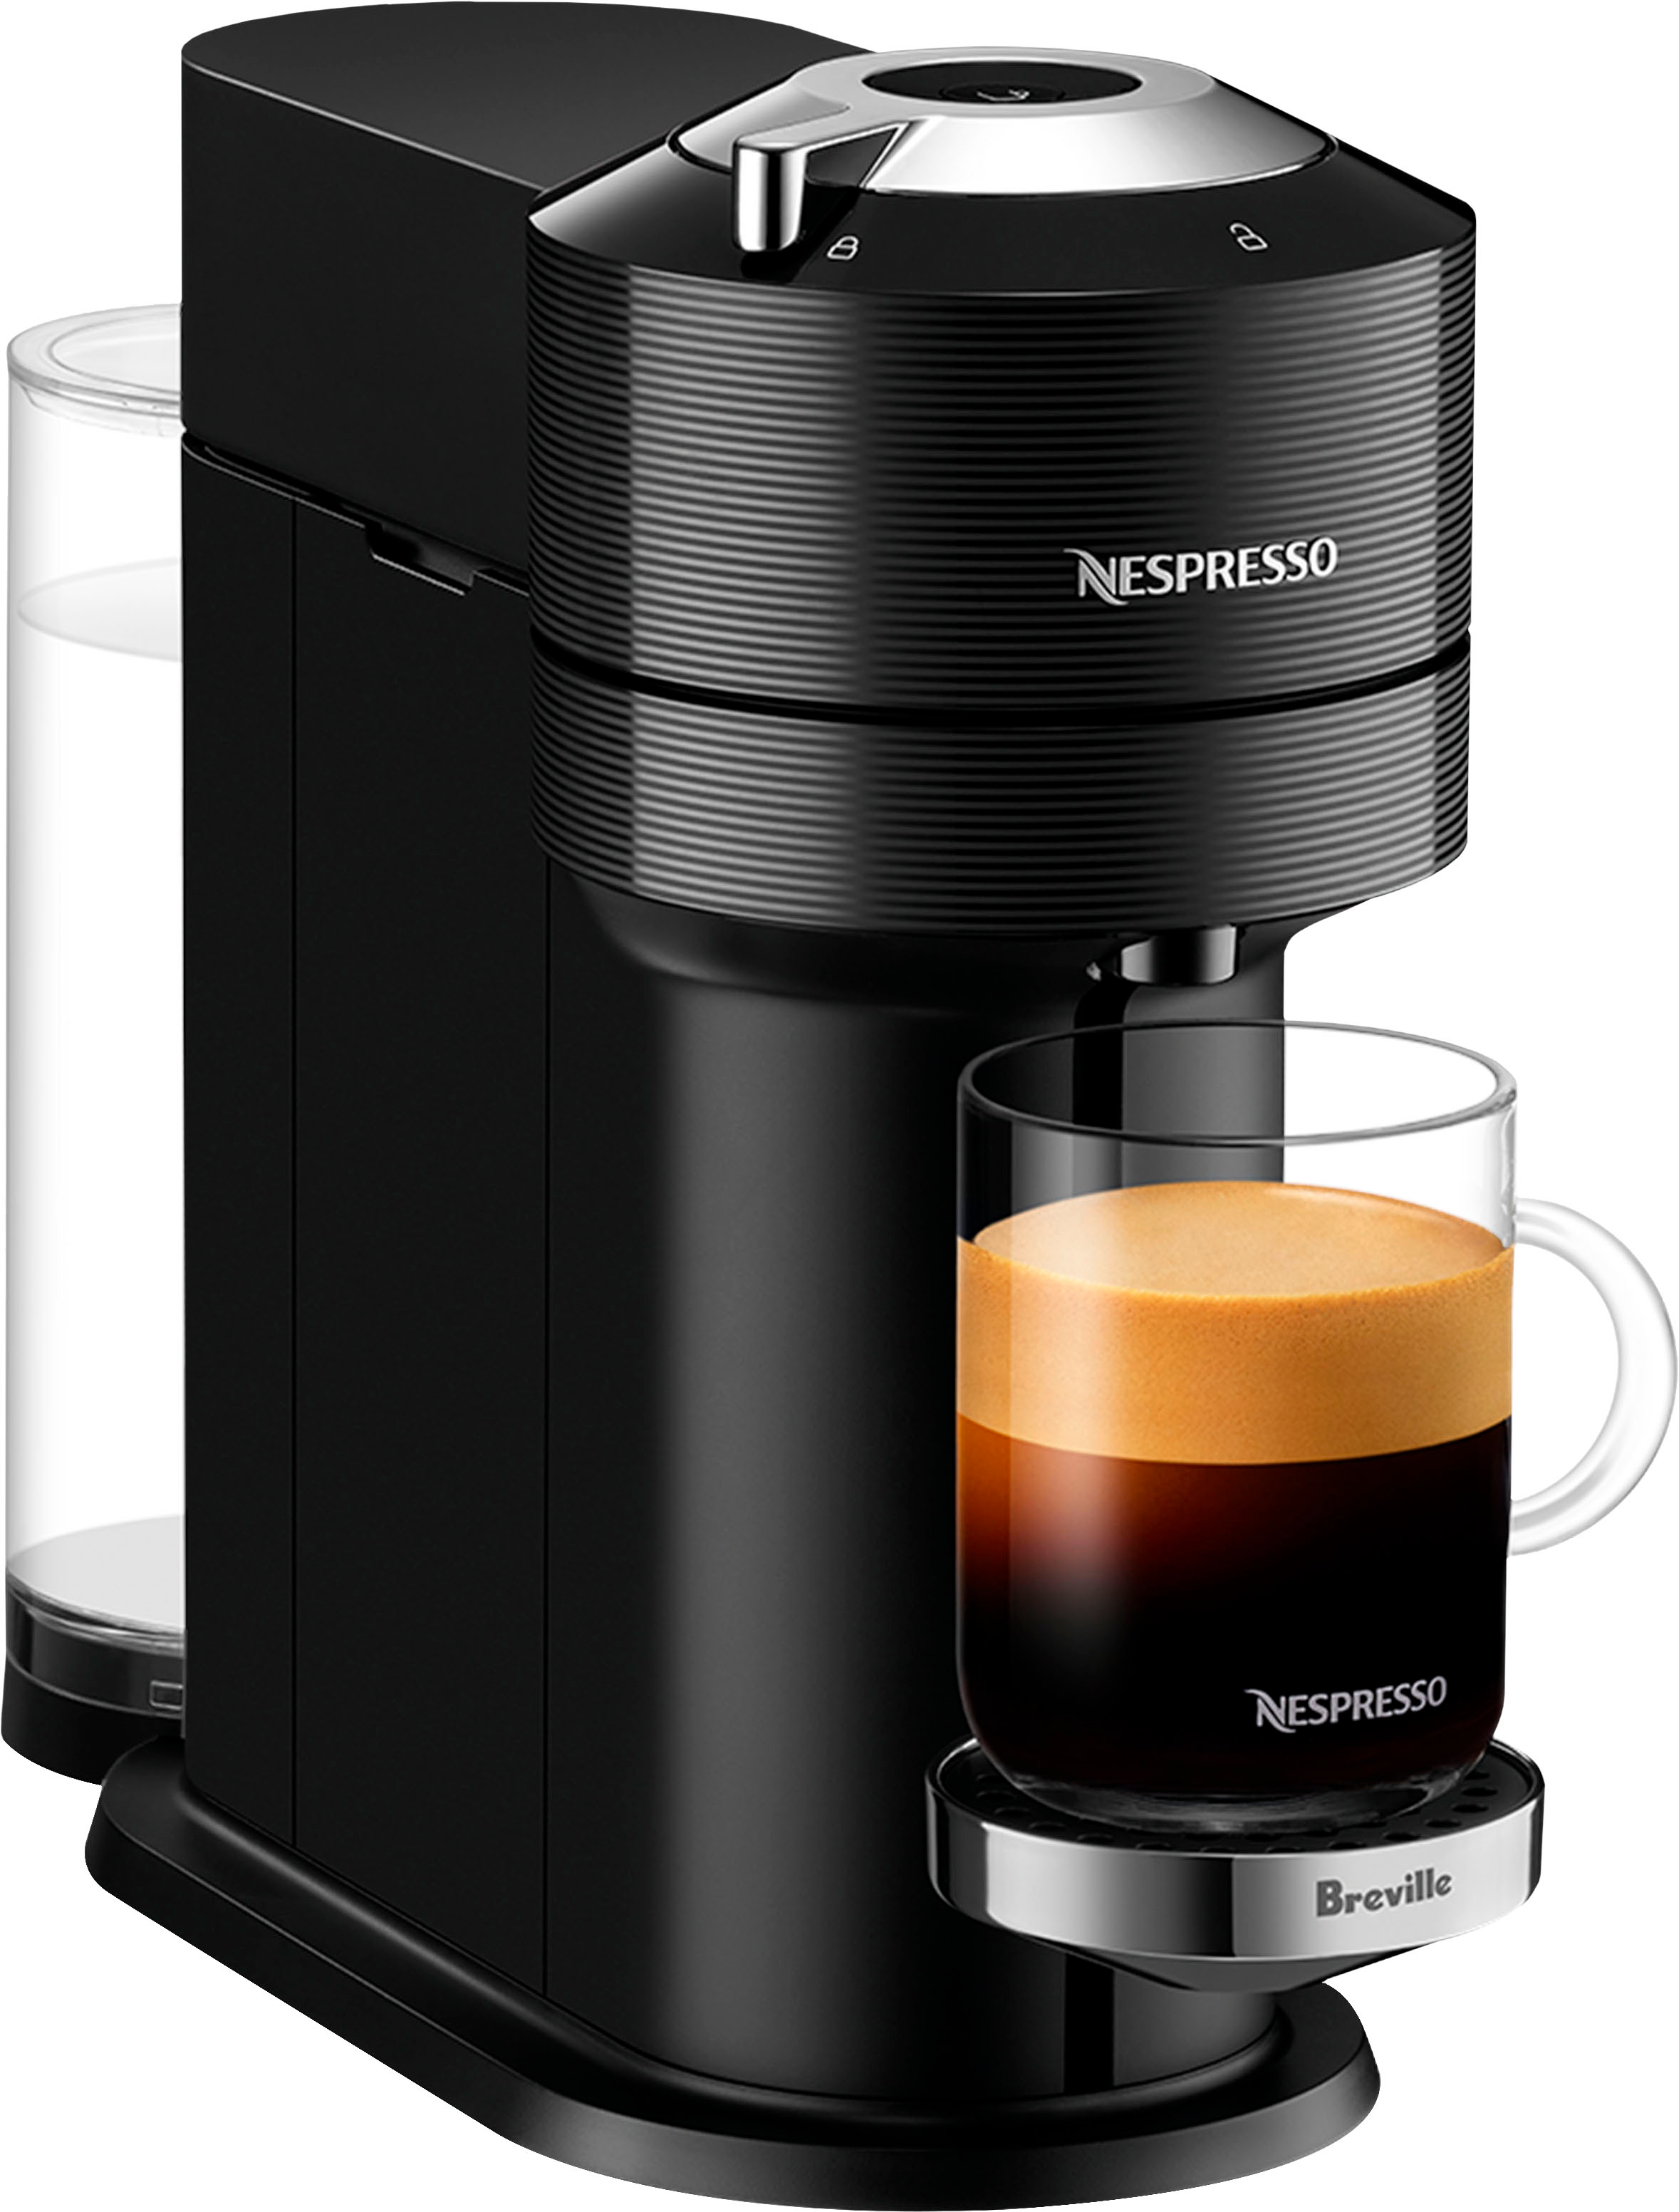 Nespresso Vertuo Next Coffee and Espresso Machine by De'Longhi, White,  Compact, One Touch to Brew, Single-Serve Coffee Maker and Espresso Machine